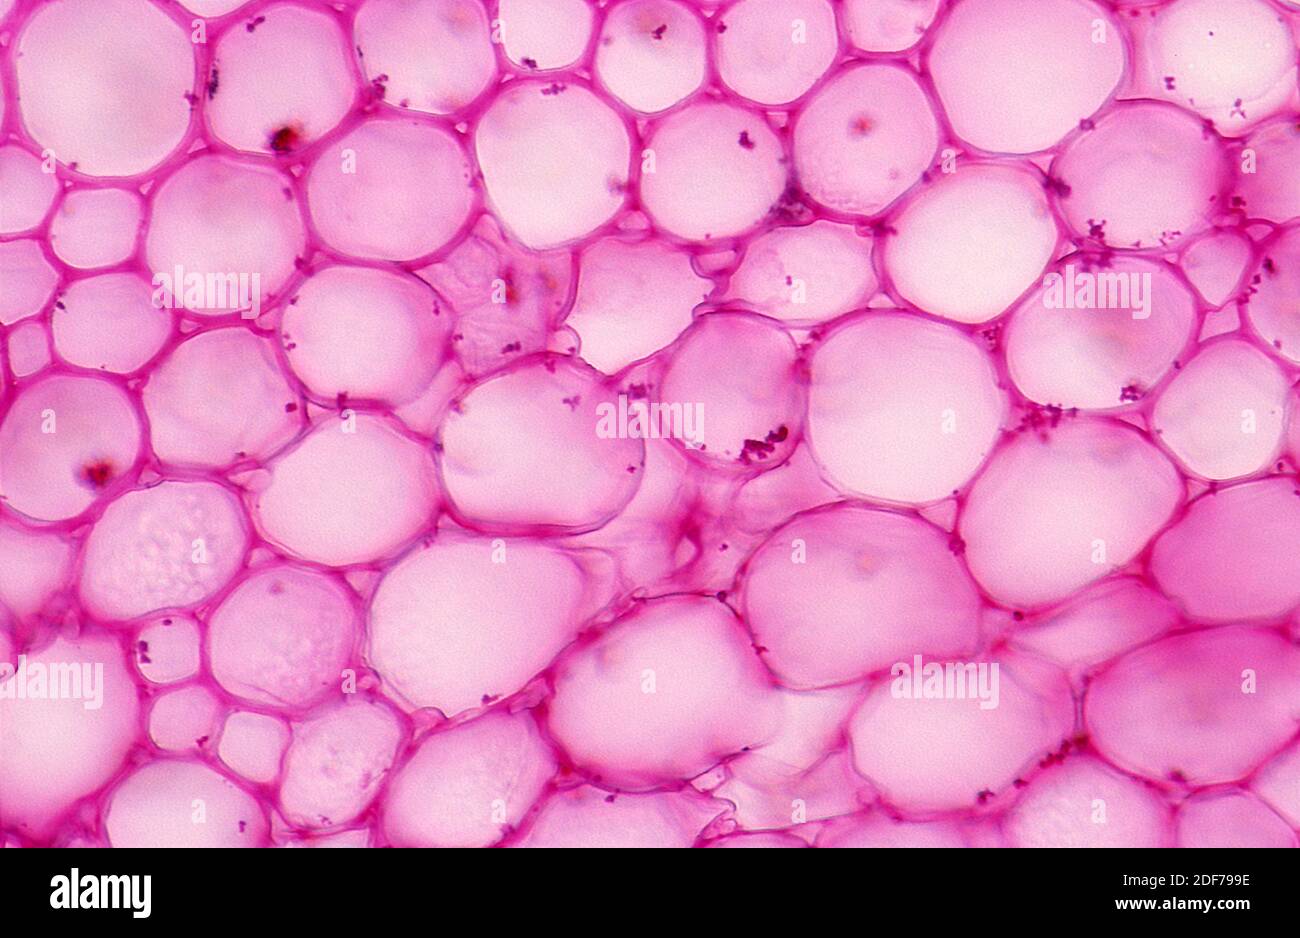 Aquifer parenchyma is a plant tissue specialized in storing water. Photomicrograph. Stock Photo